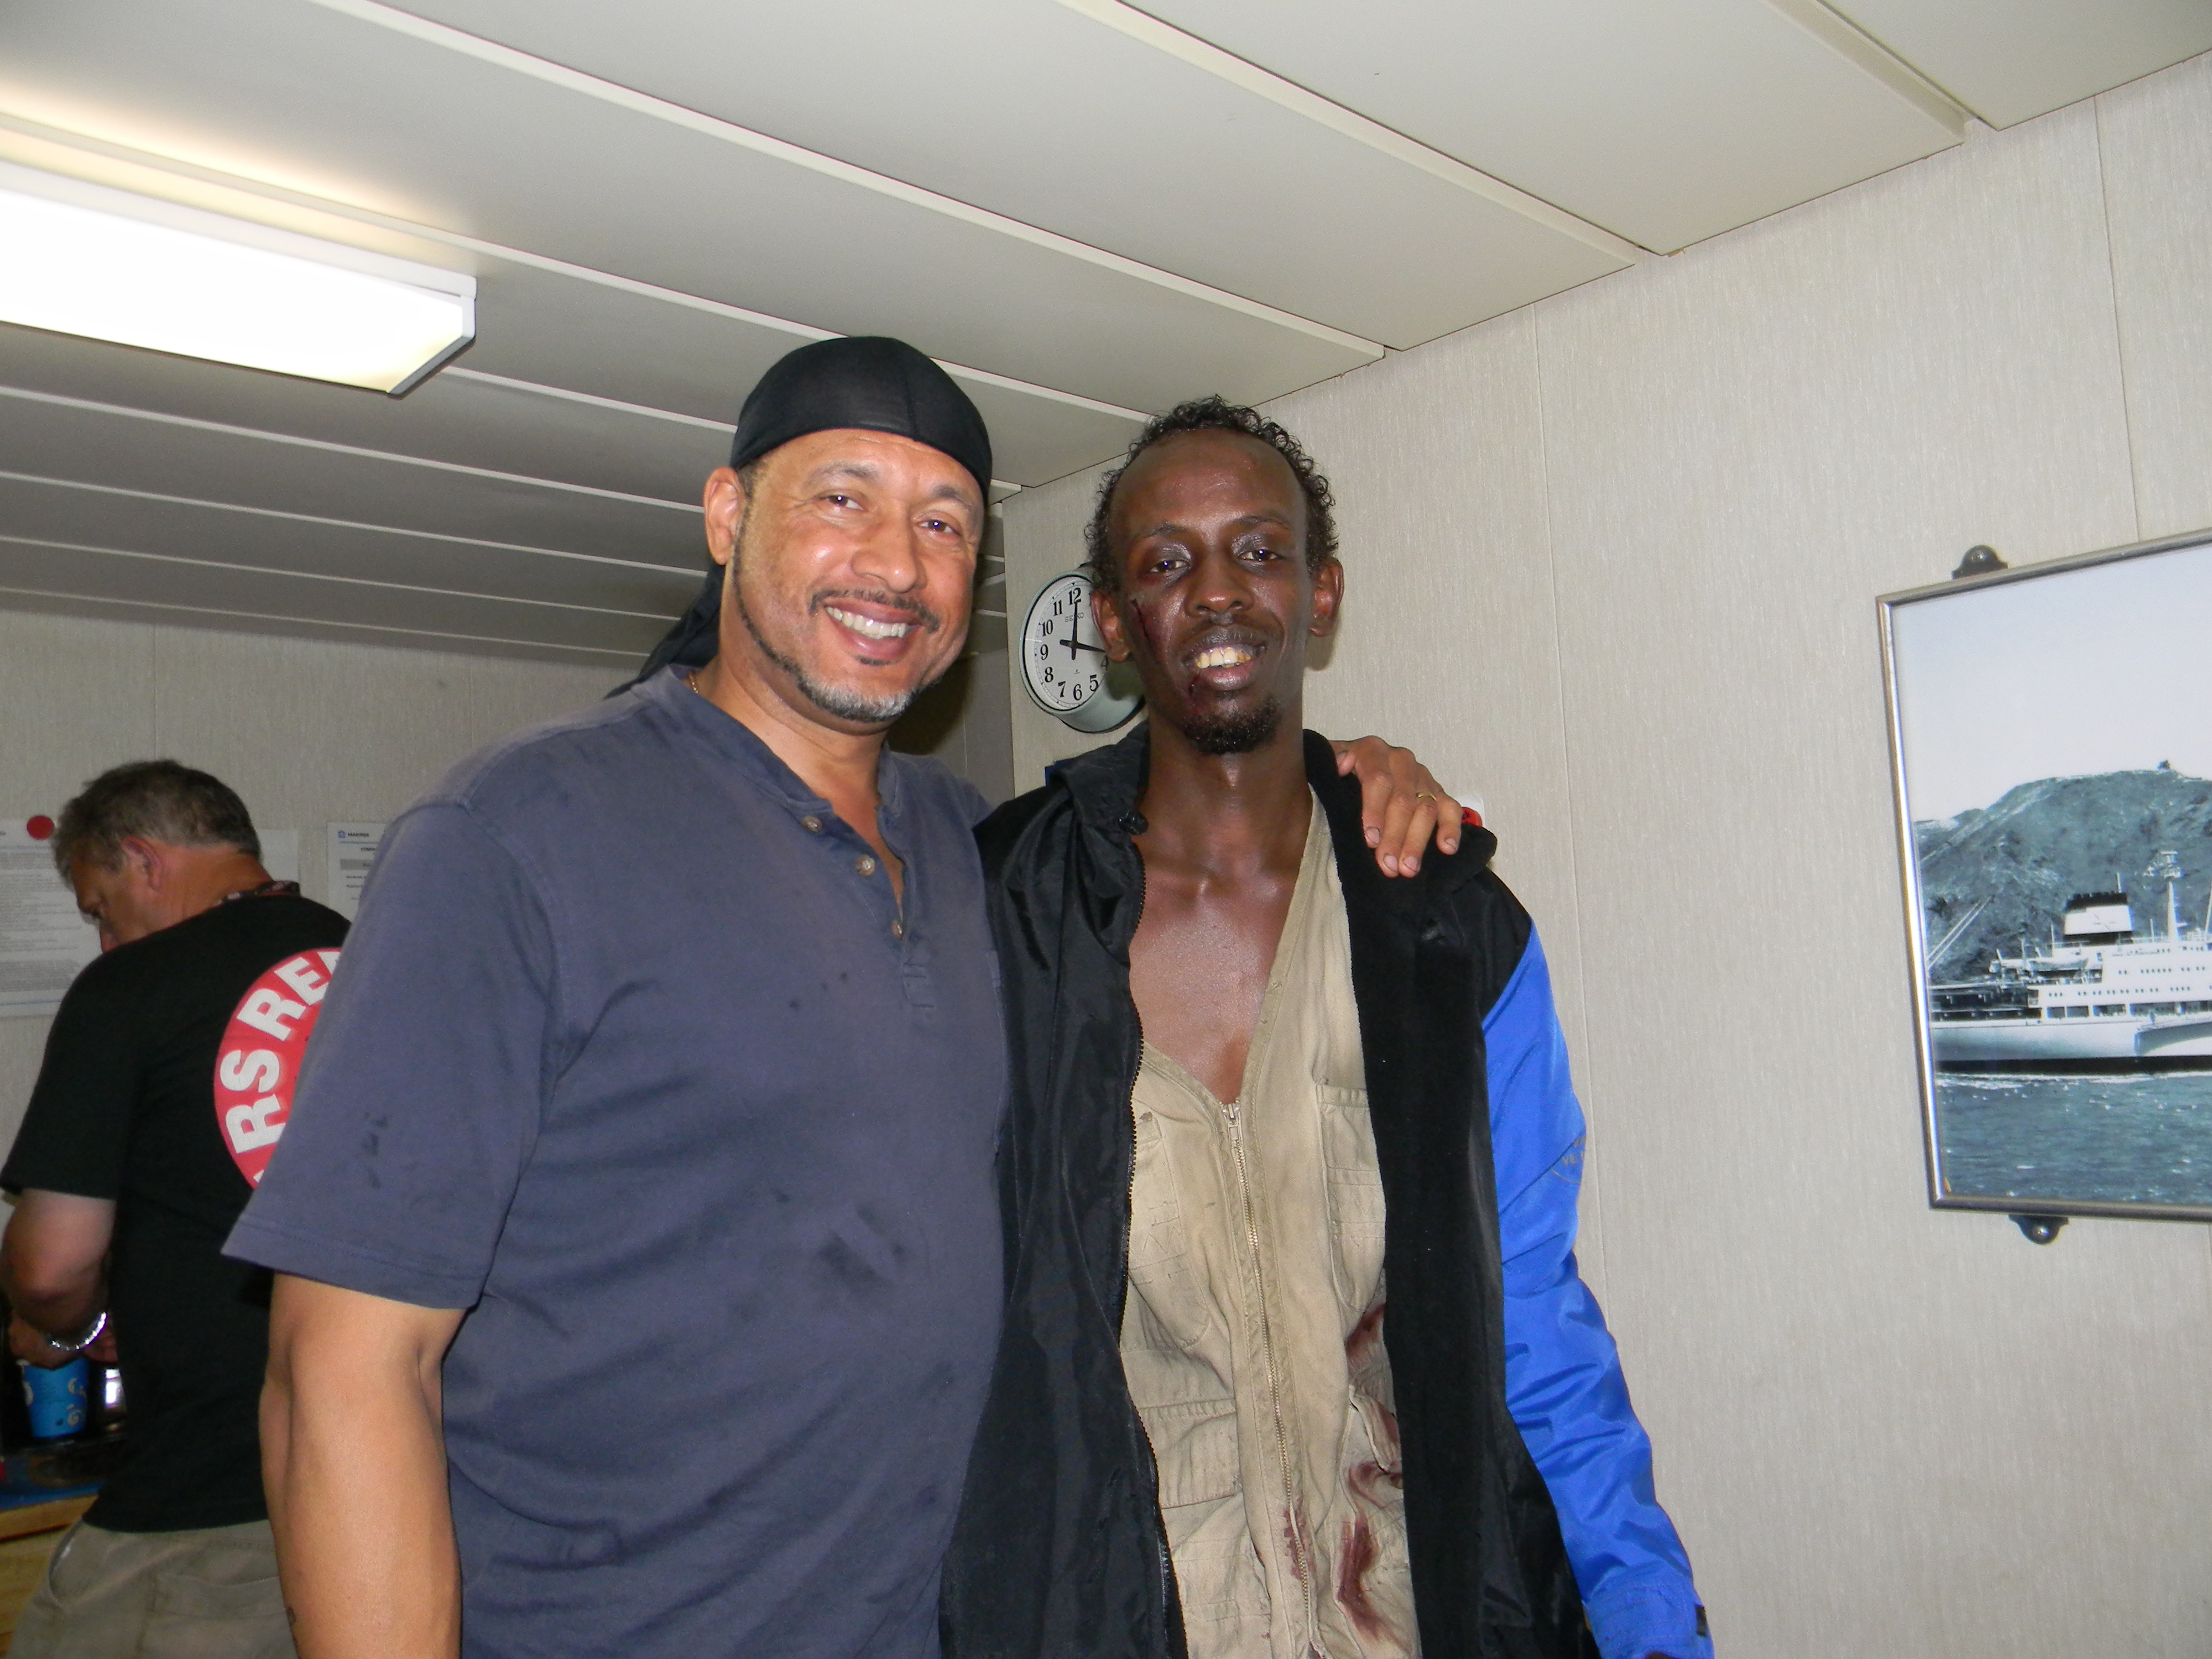 Mark Holden and Barked Abdi taking a break on the set of Captain Phillips in Malta.